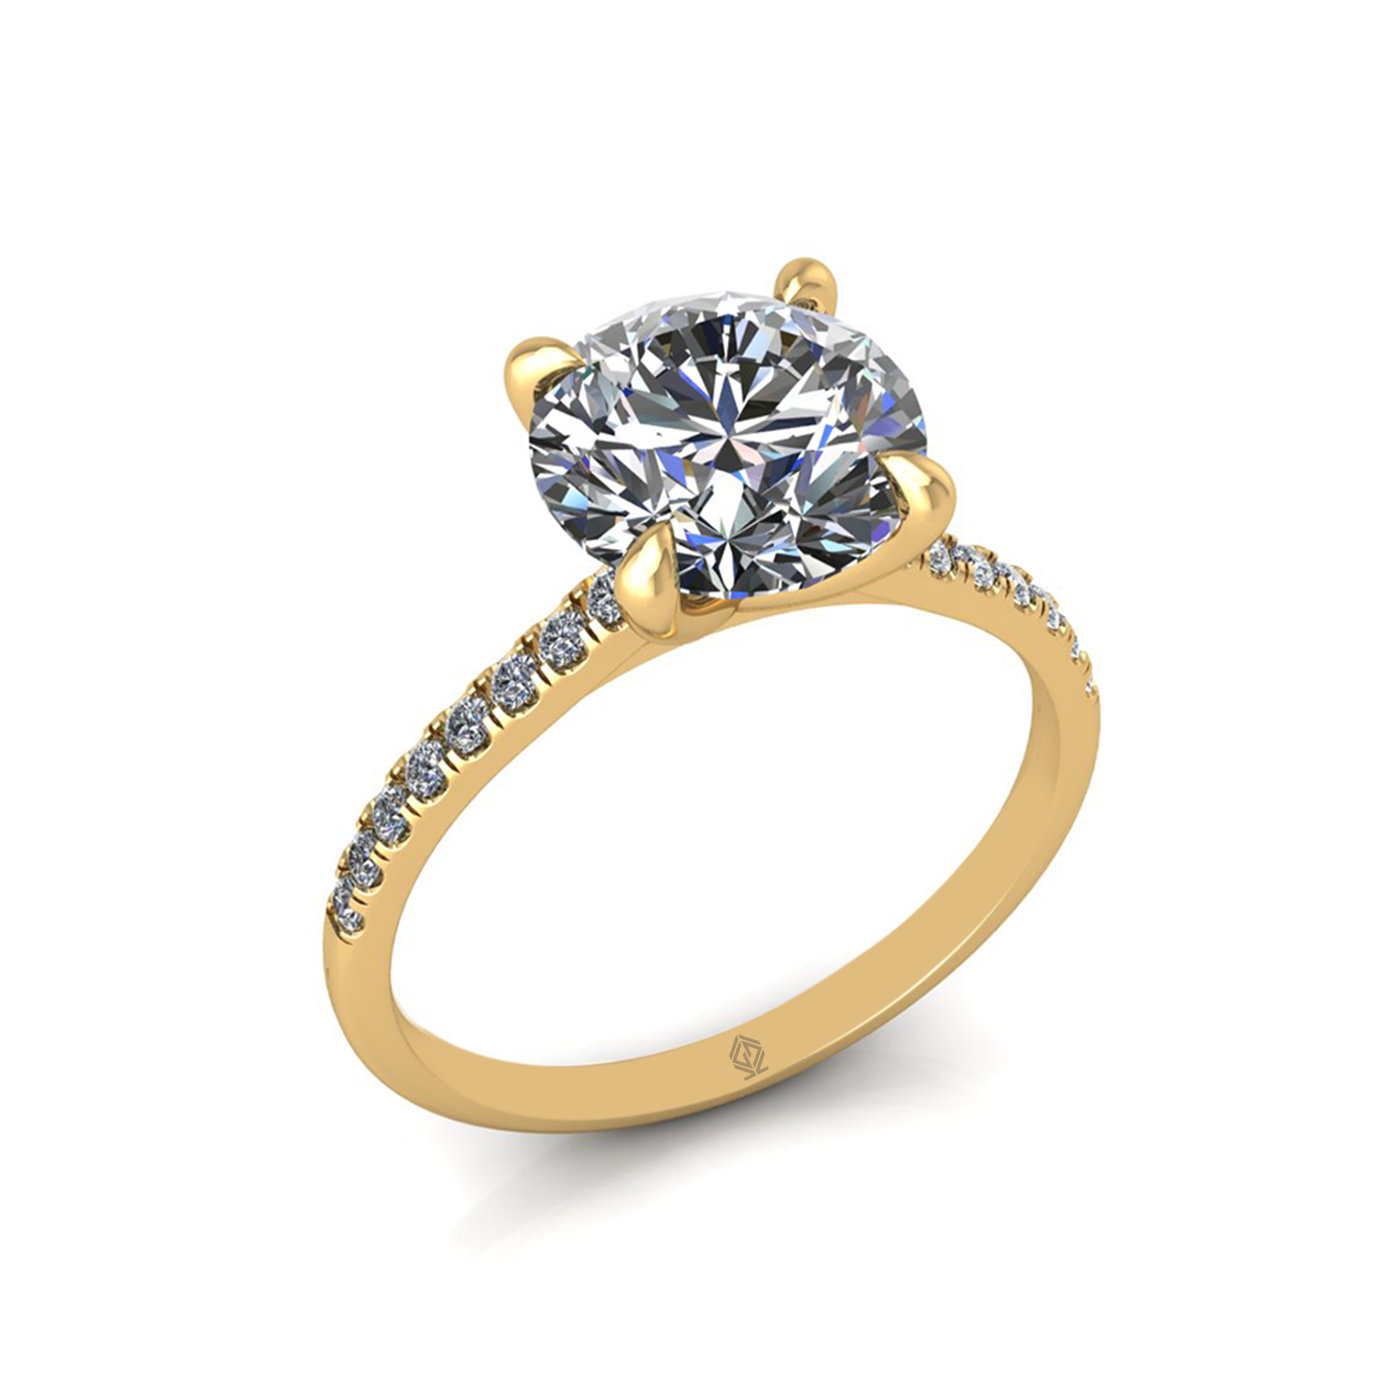 18k yellow gold 2.5ct 4 prongs round cut diamond engagement ring with whisper thin pavÉ set band